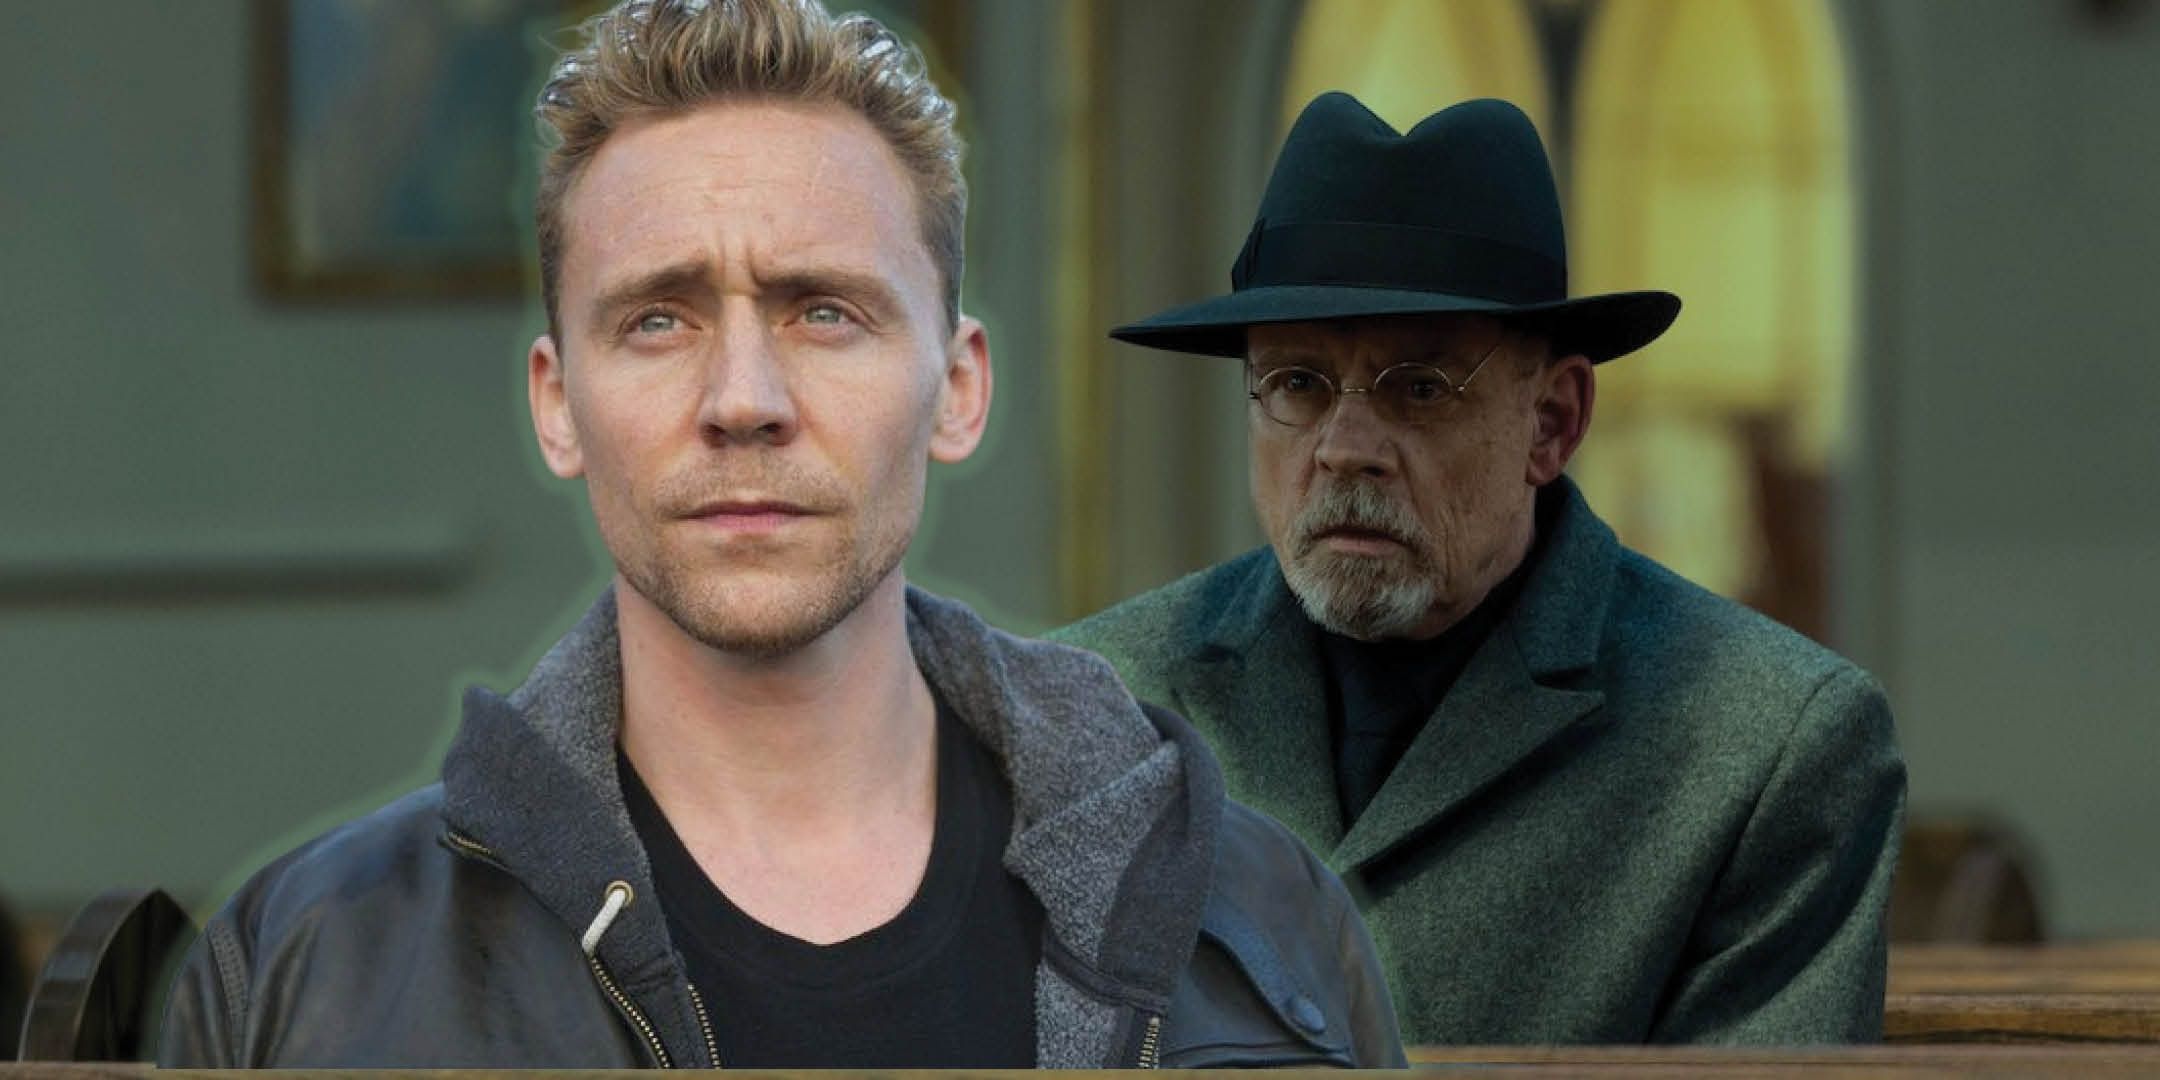 a custom image combining shots of Tom Hiddleston and Mark Hamill, who star in The Life of Chuck